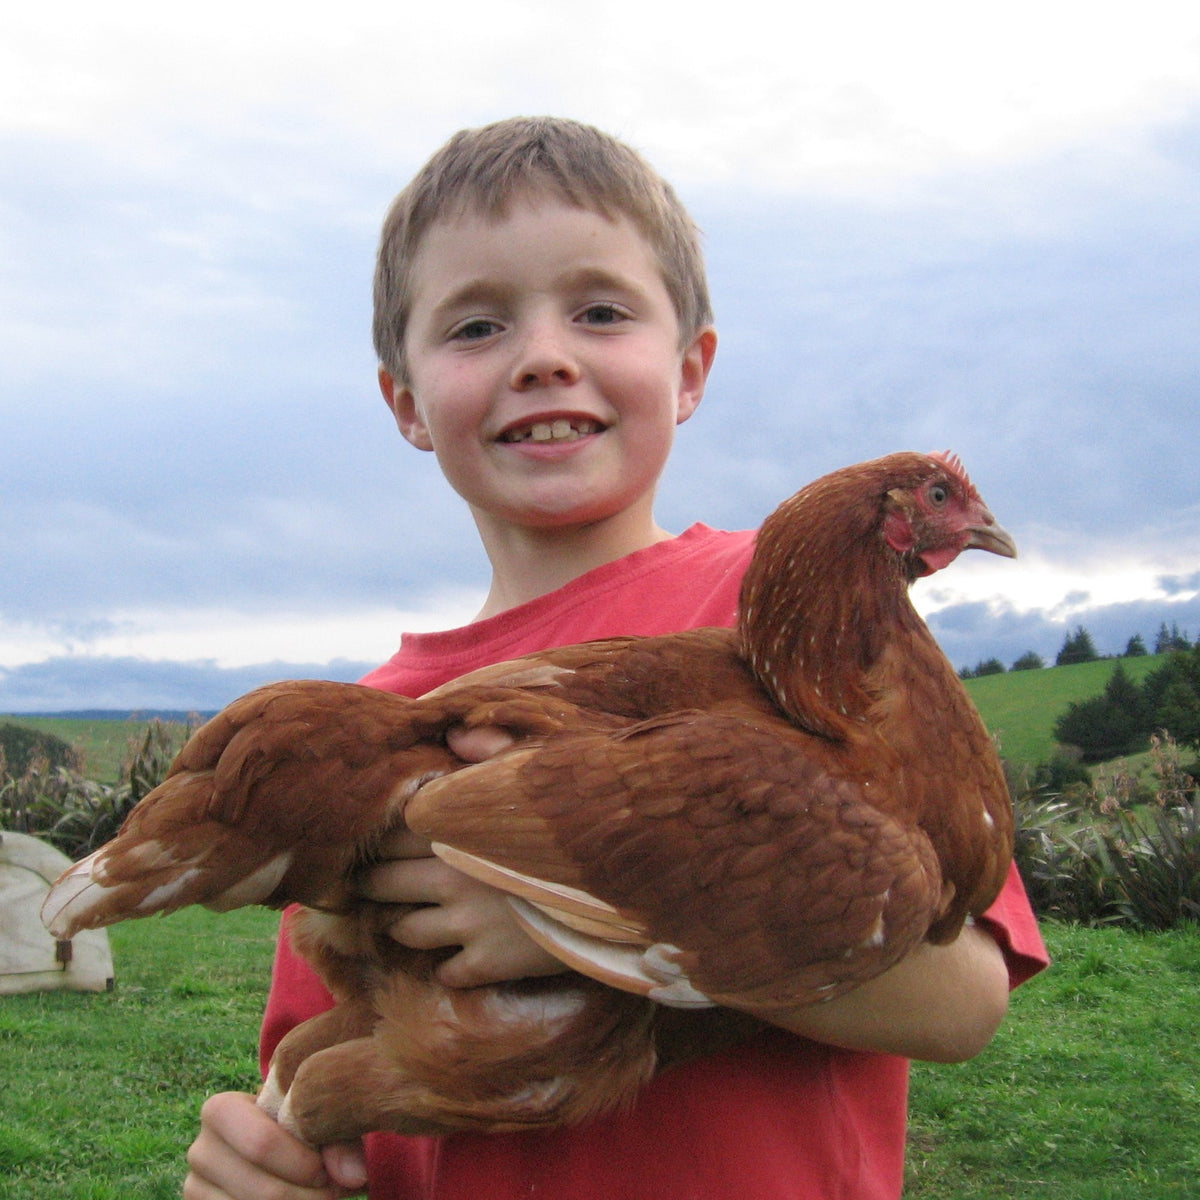 children can readily participate with caring for egg layer hens